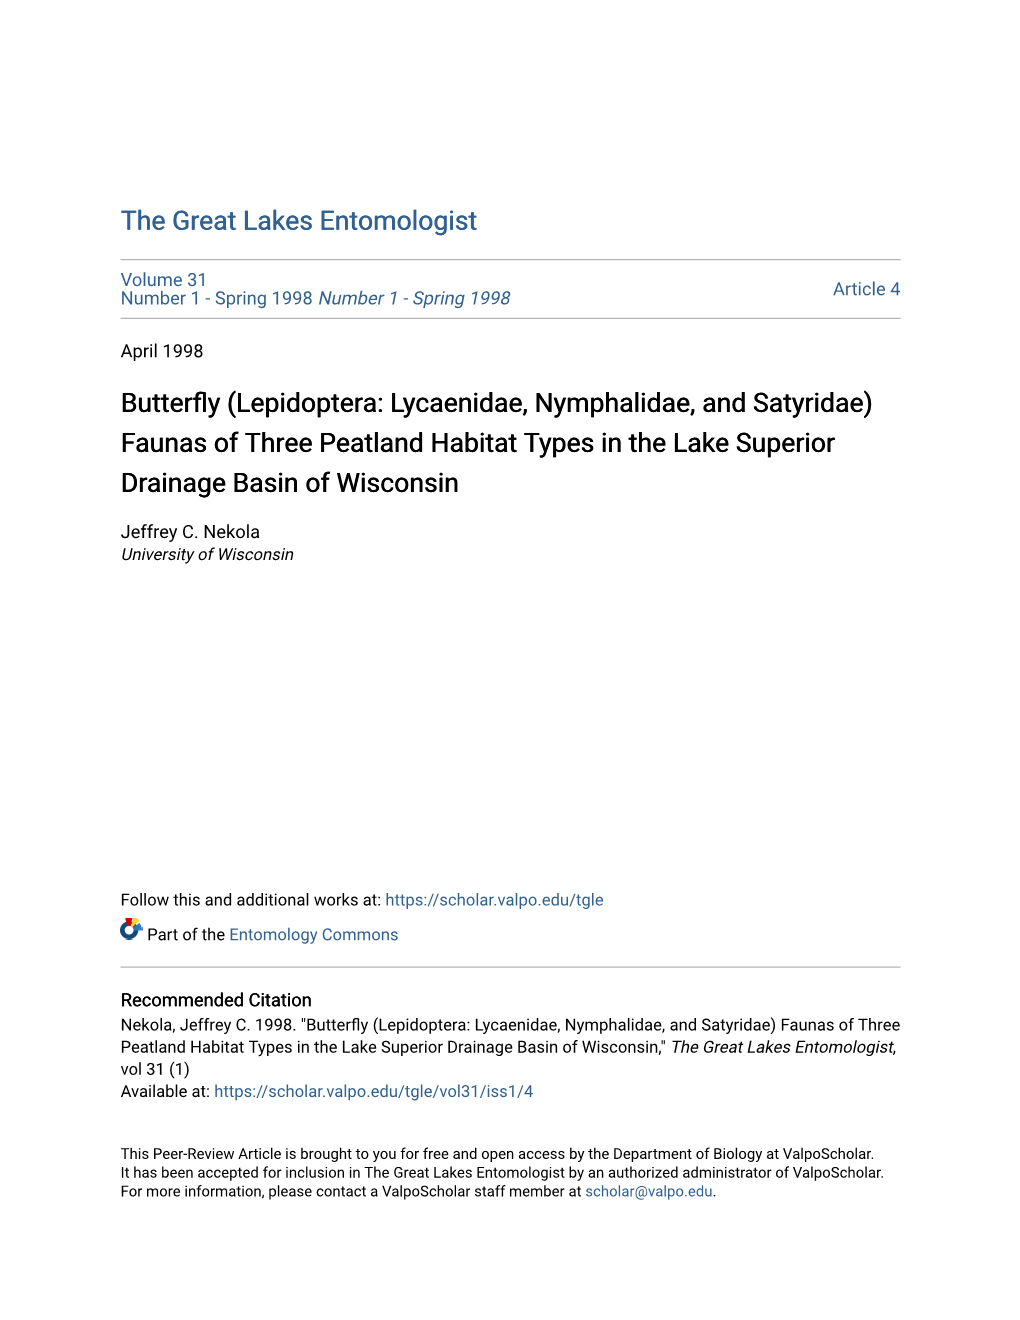 Butterfly (Lepidoptera: Lycaenidae, Nymphalidae, and Satyridae) Faunas of Three Peatland Habitat Types in the Lake Superior Drainage Basin of Wisconsin